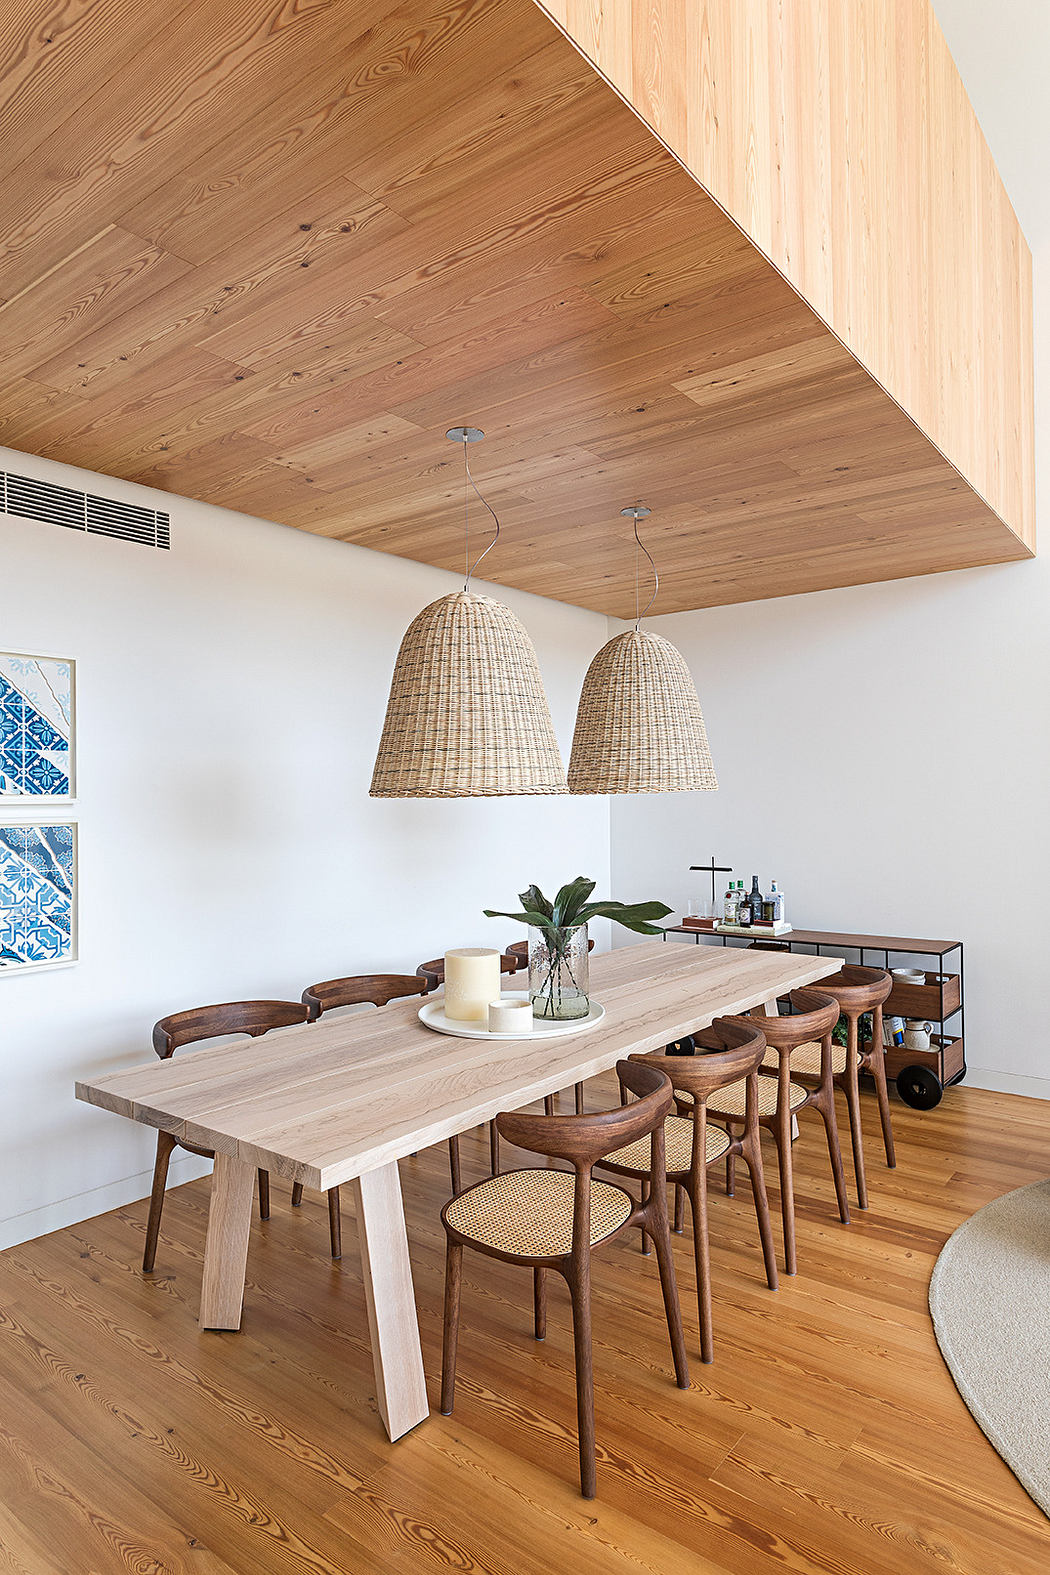 Modern dining room with wooden table, woven pendant lights, and slanted ceiling.